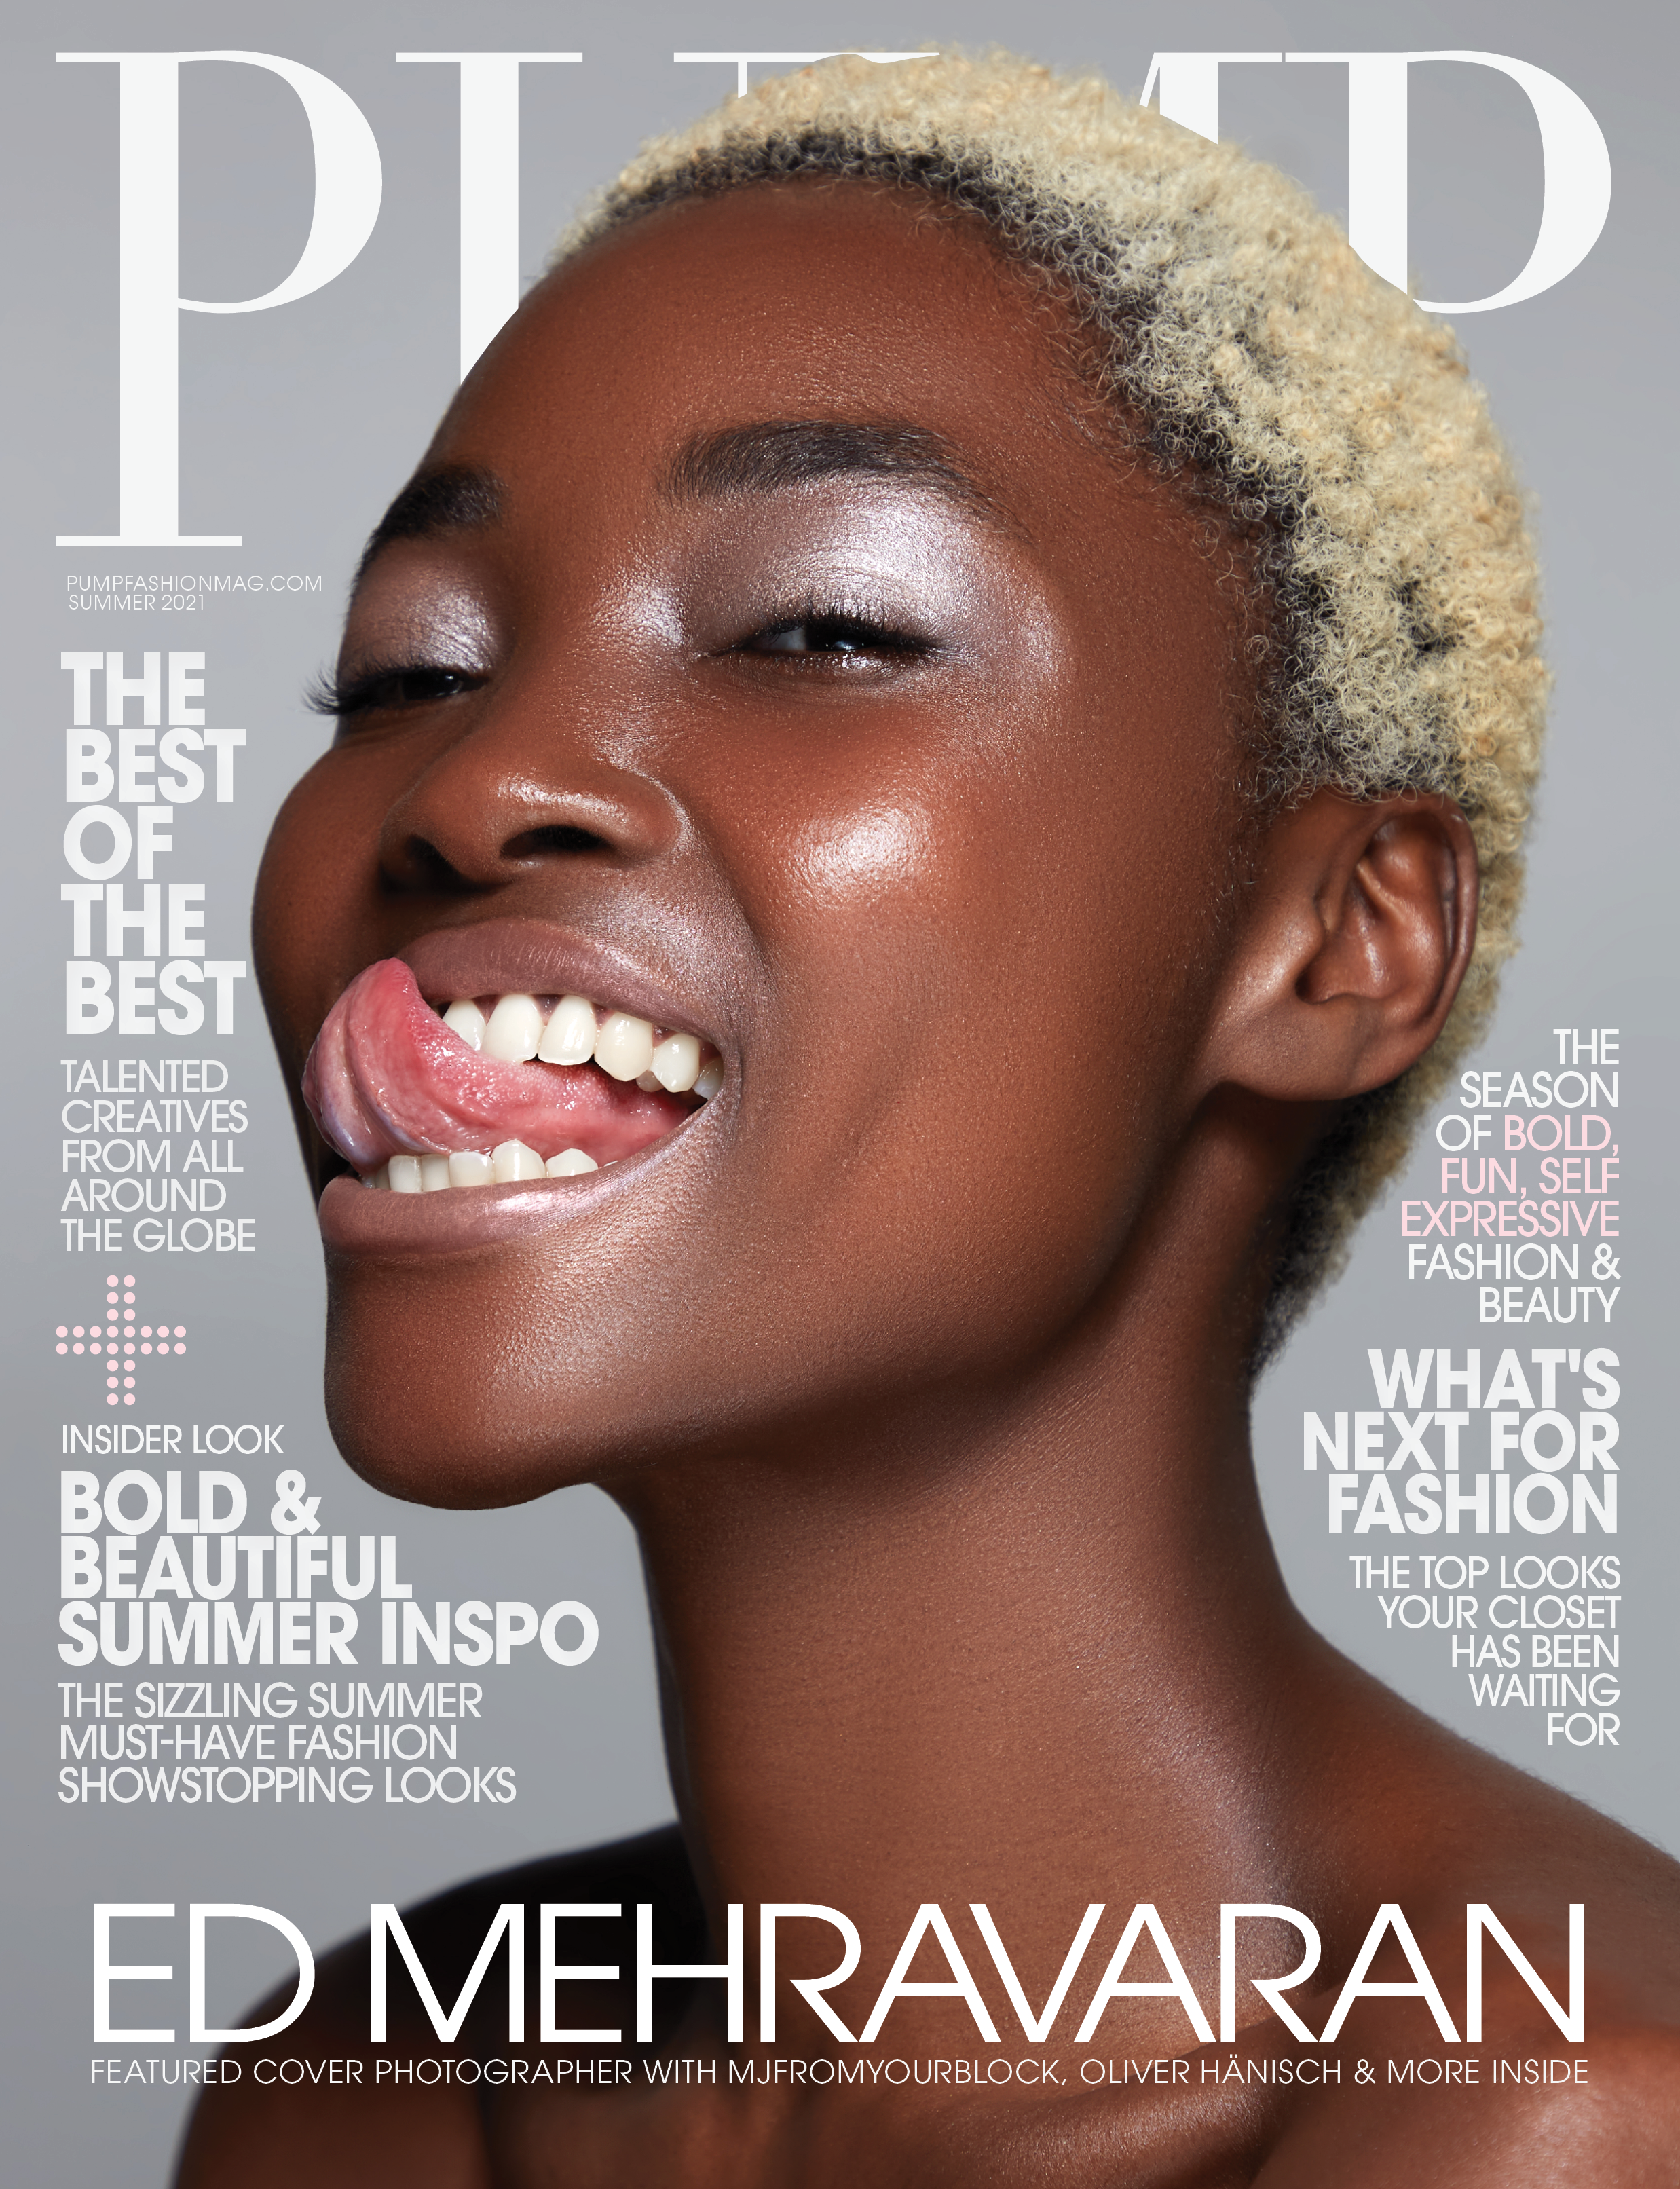 PUMP Magazine The Ultimate Fashion Edition Vol.5 June 2021 Cover(1).png